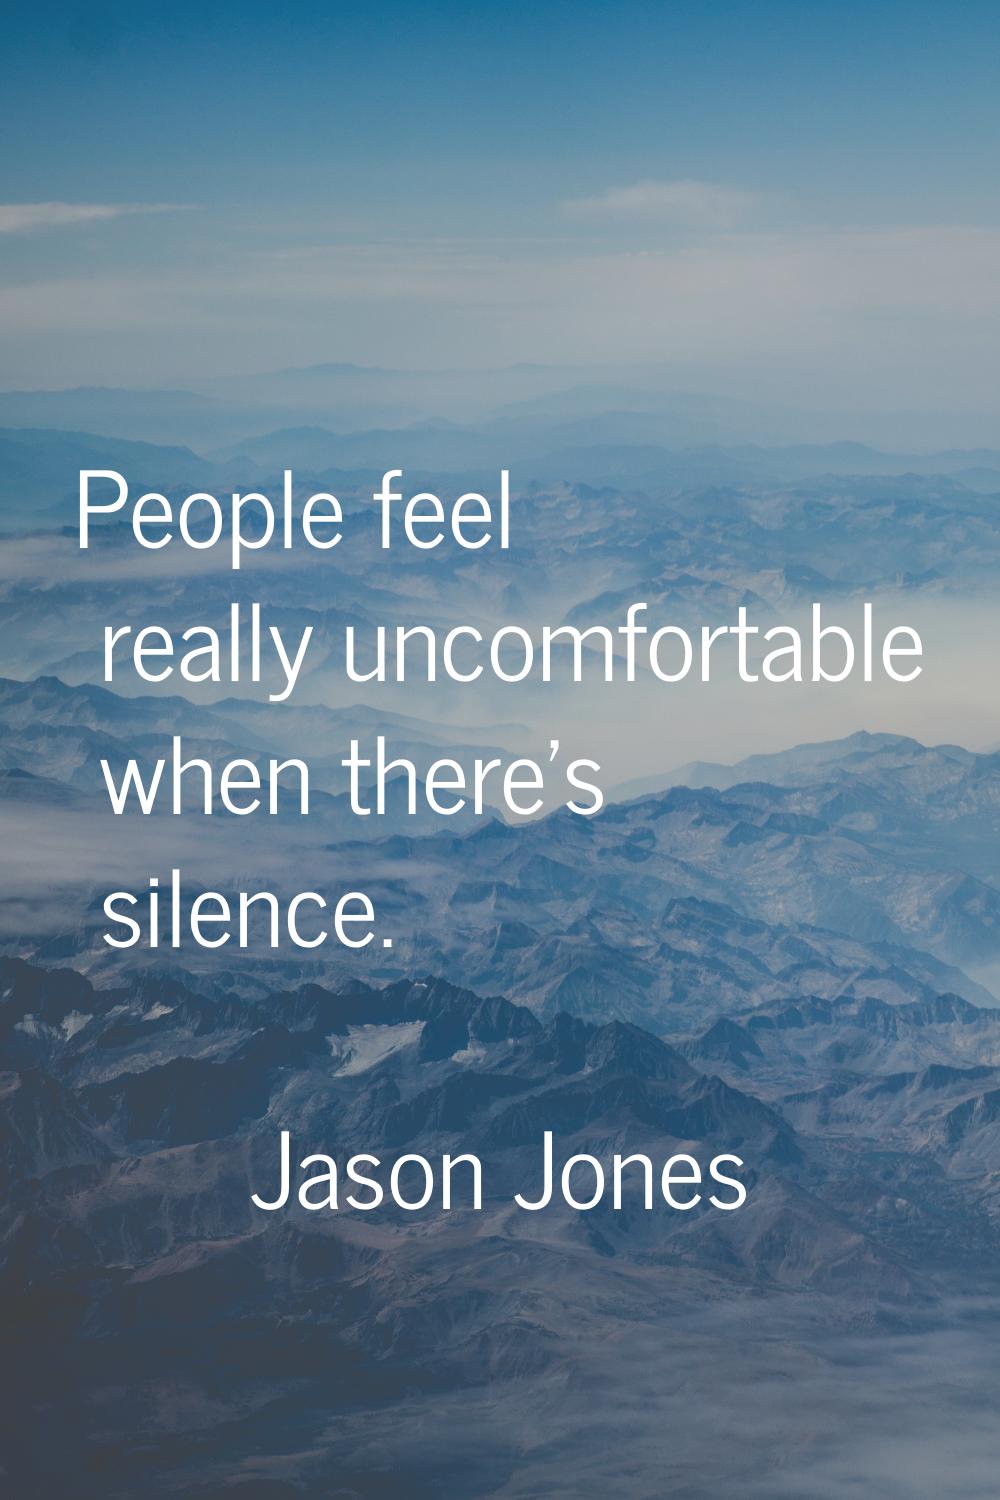 People feel really uncomfortable when there's silence.